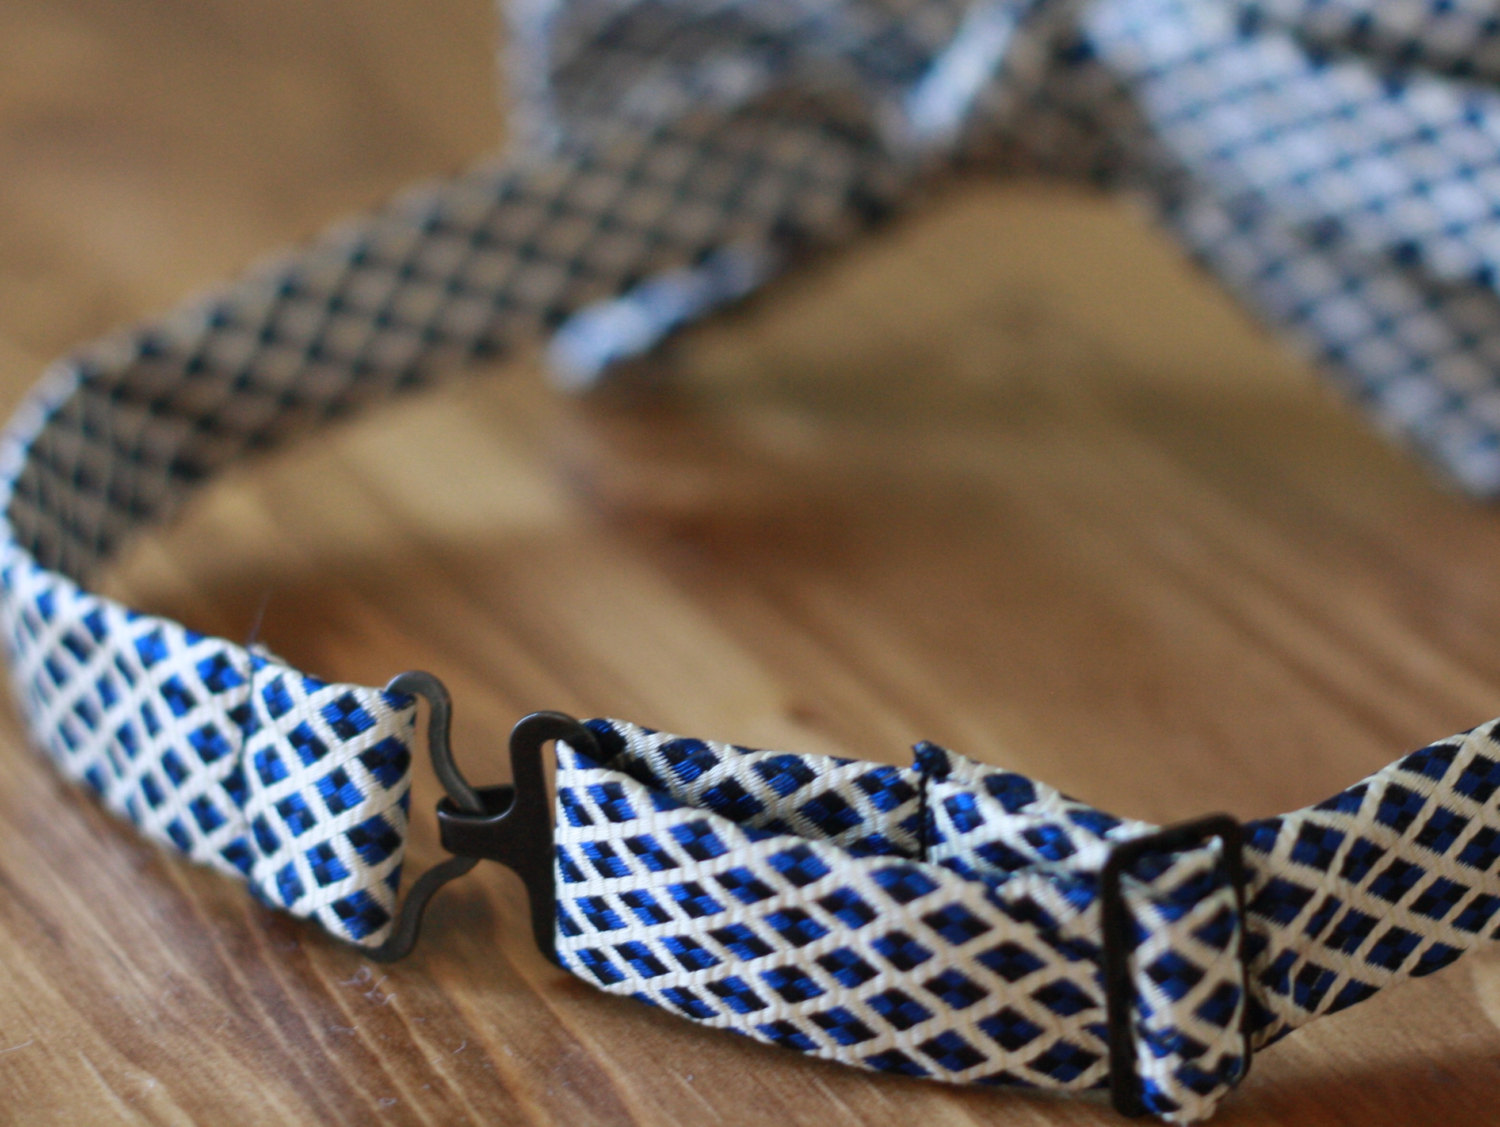 Bow tie PDF Sewing Pattern  - Upcycled from Necktie - Bowtie Pattern